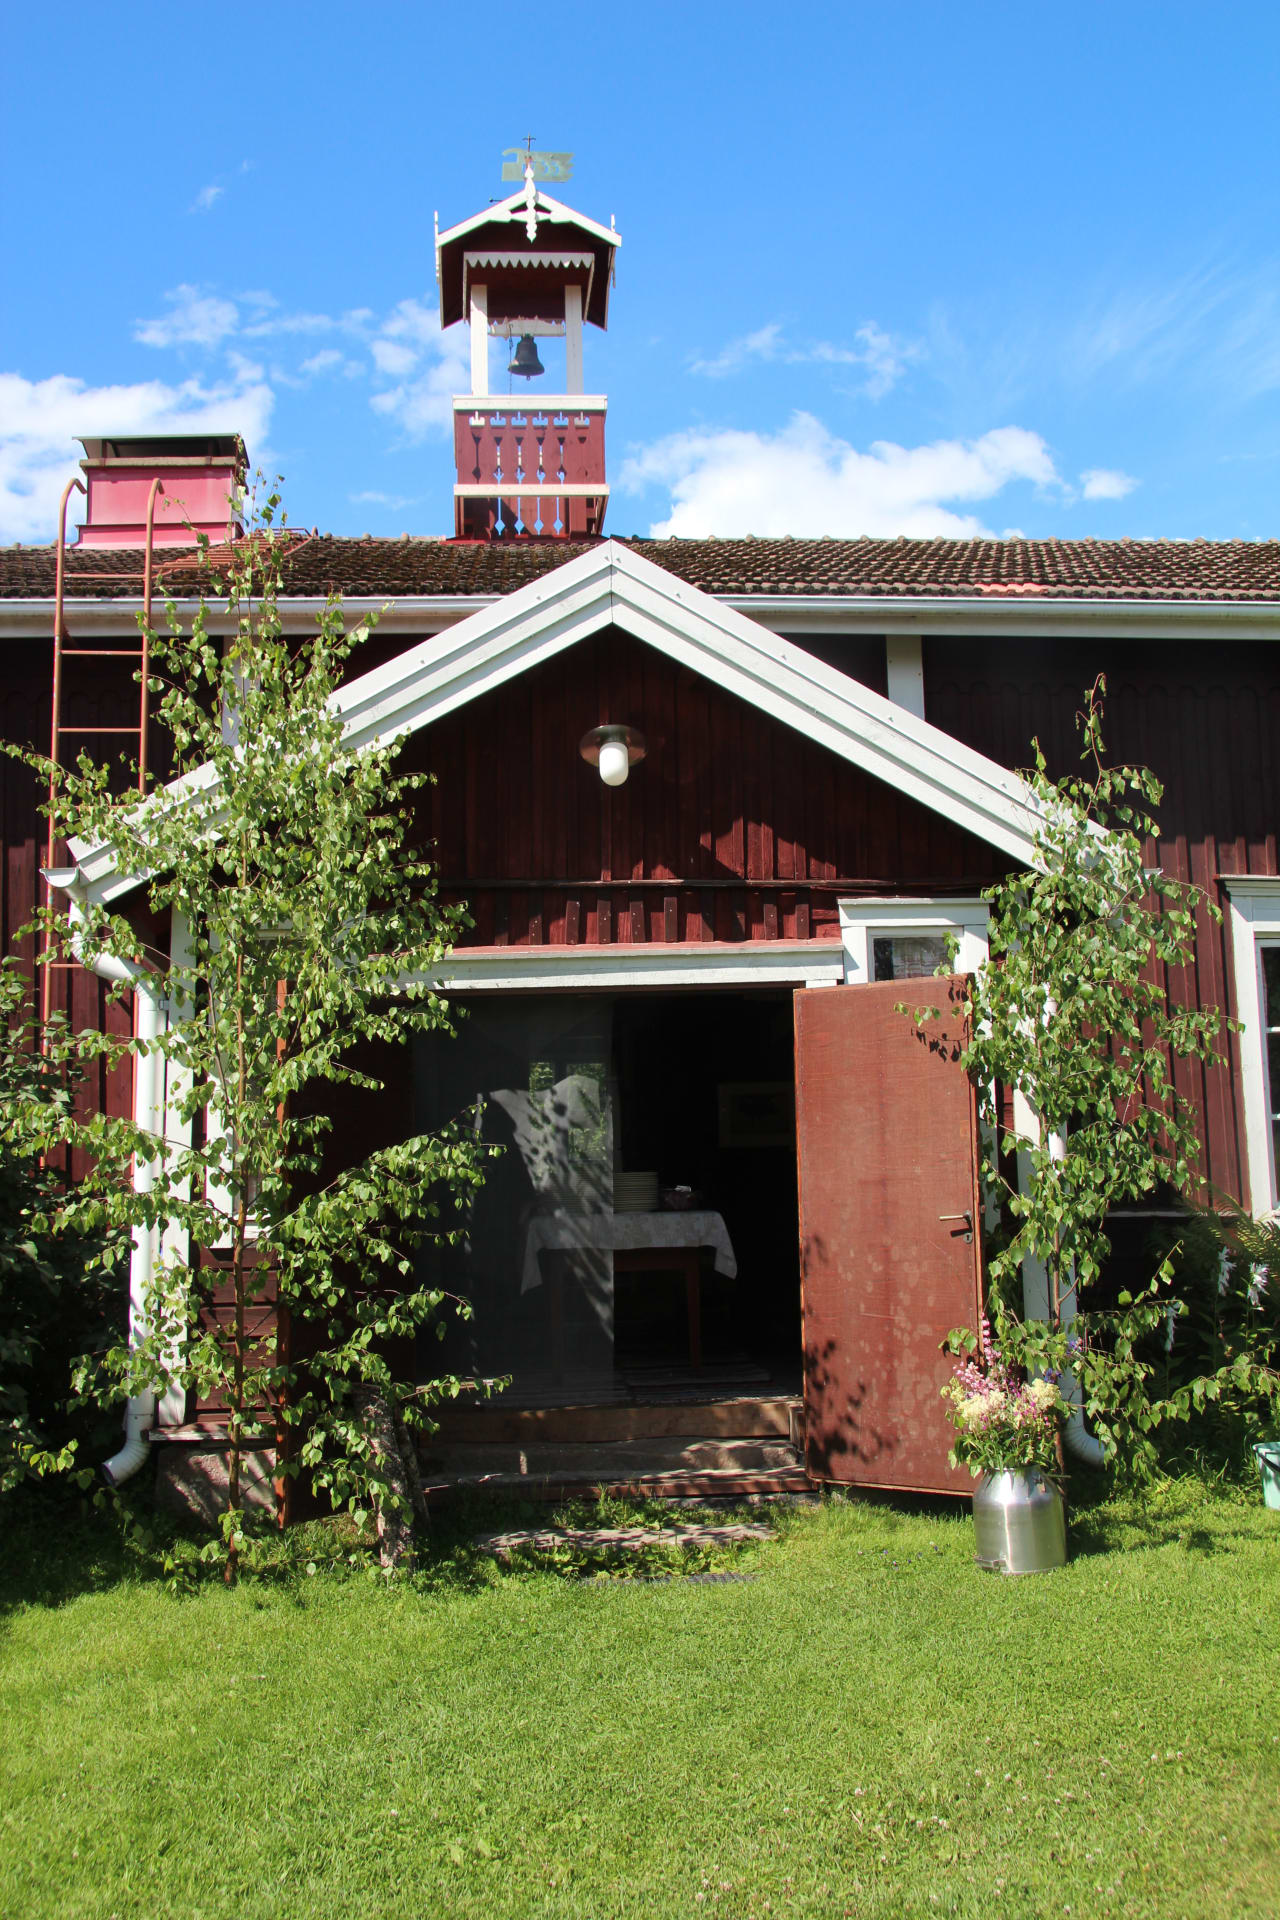 Old Side Building, porch with midsummer birches